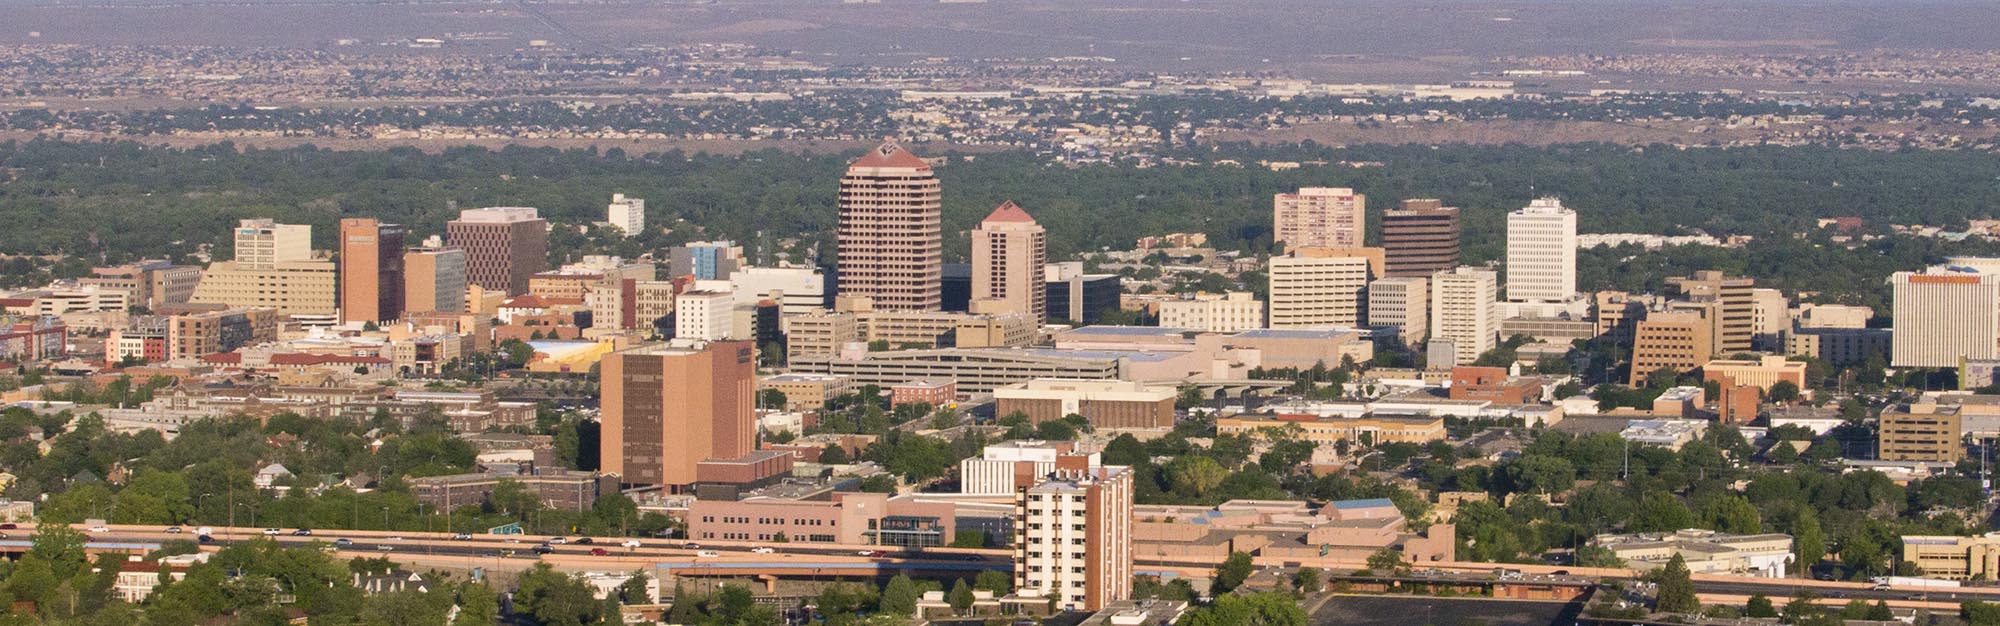 Aerial view of Albuquerque downtown